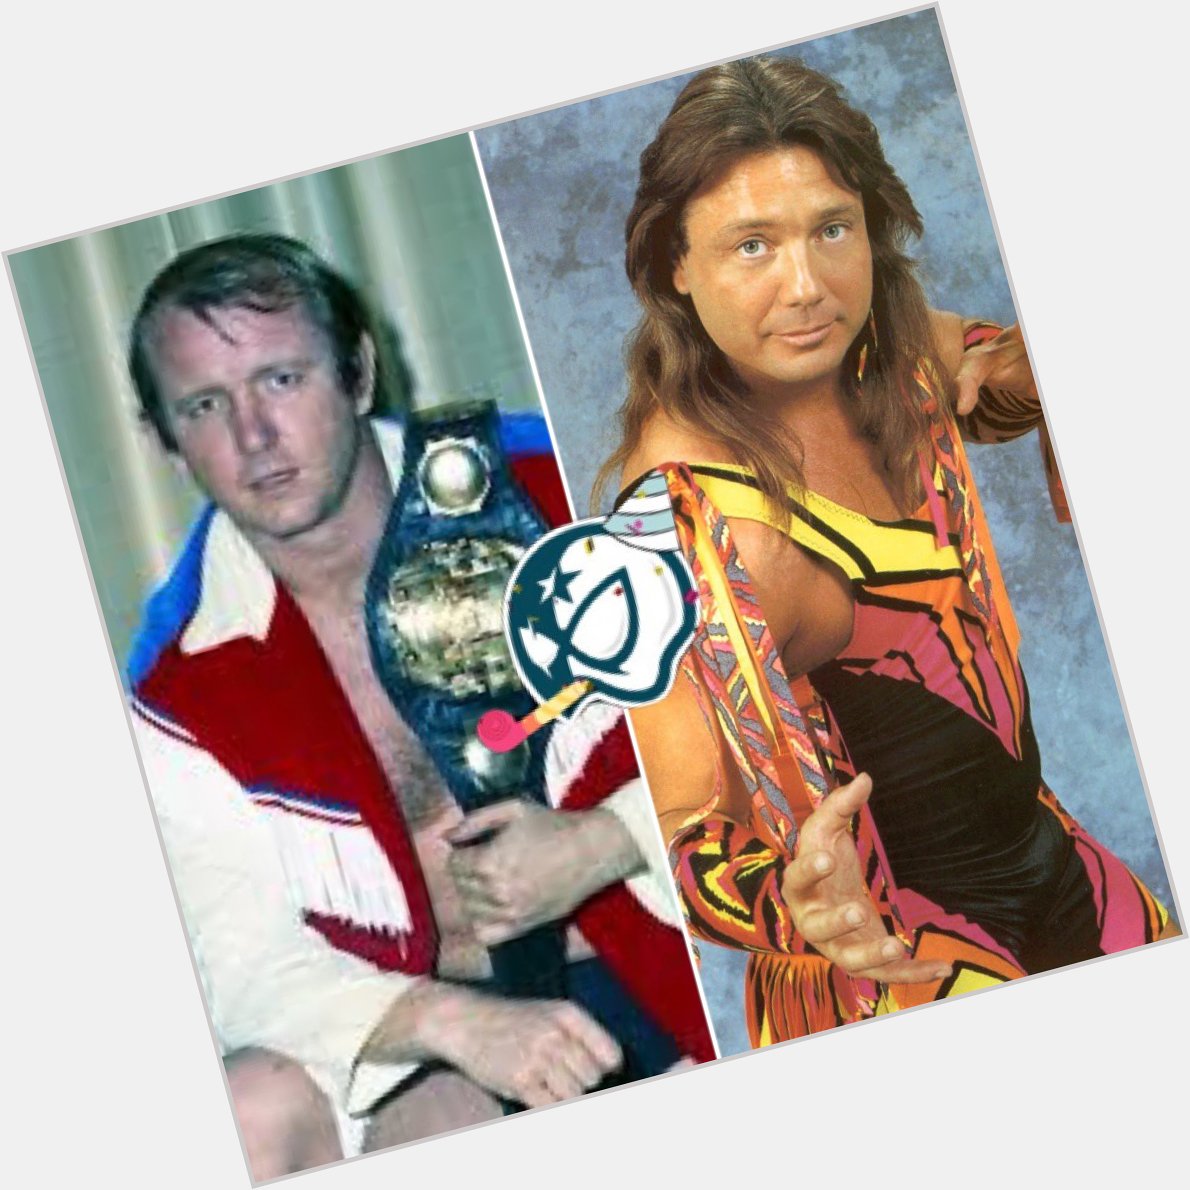 Happy birthday wishes go out to Dory Funk Jr (81) & Marty Jannetty (62)!!! 